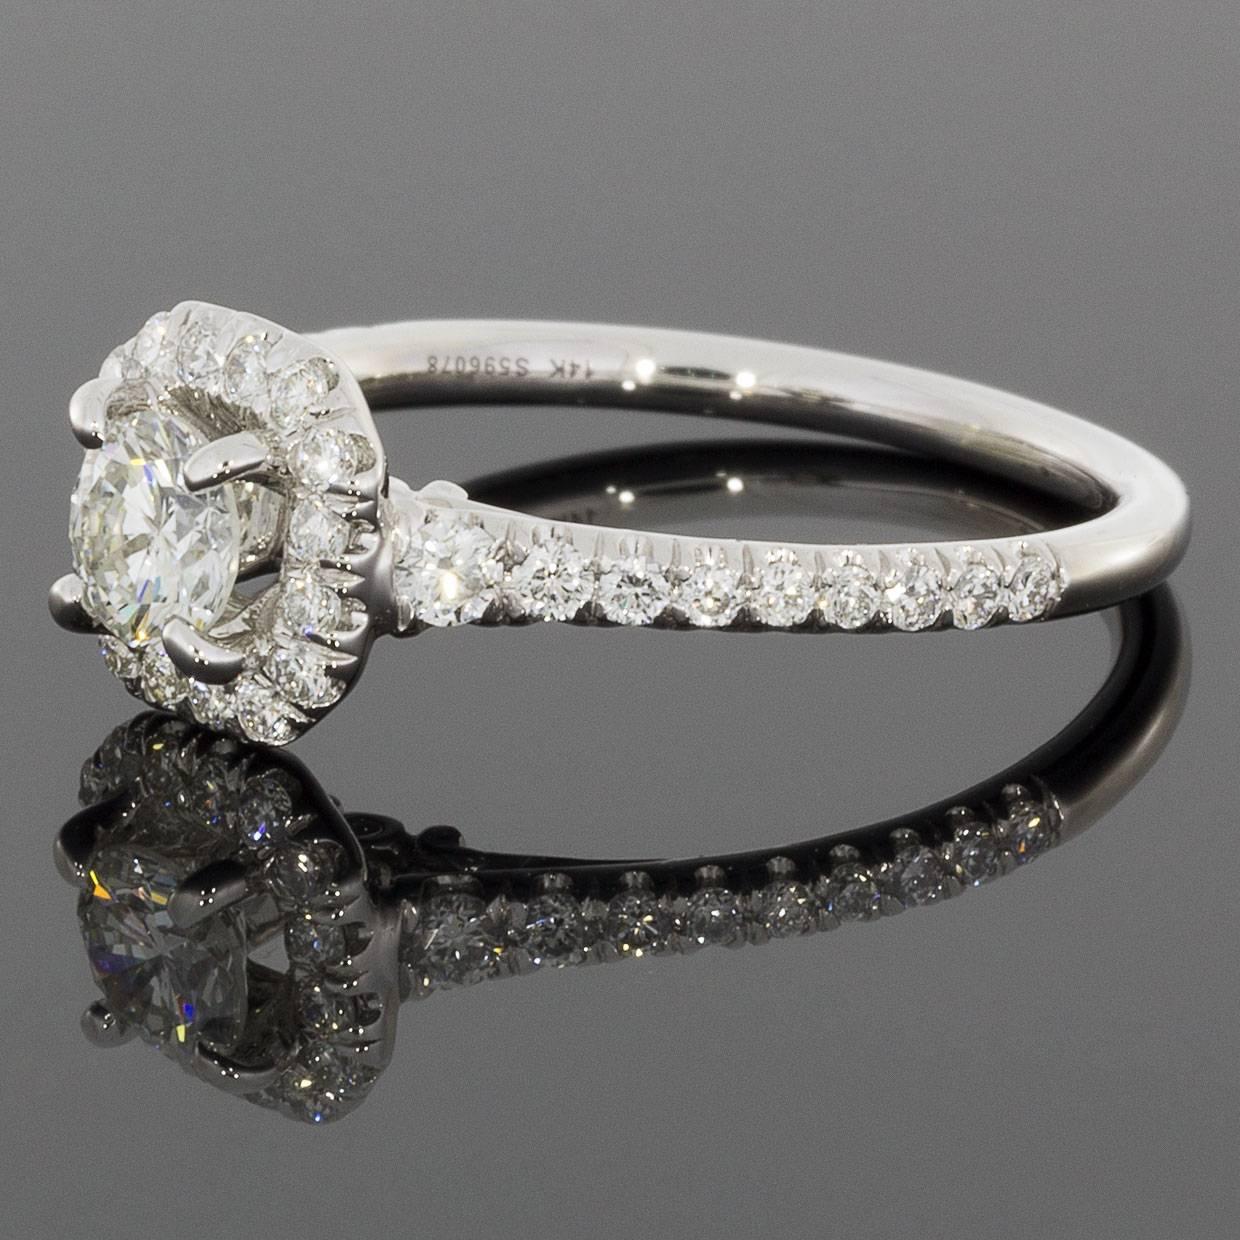 This lovely engagement ring has a classic cushion halo design. The ring features a round brilliant cut diamond center that weighs .38 carat & grades as H/SI1 in quality. This glistening diamond is surrounded by a cushion shaped halo of split